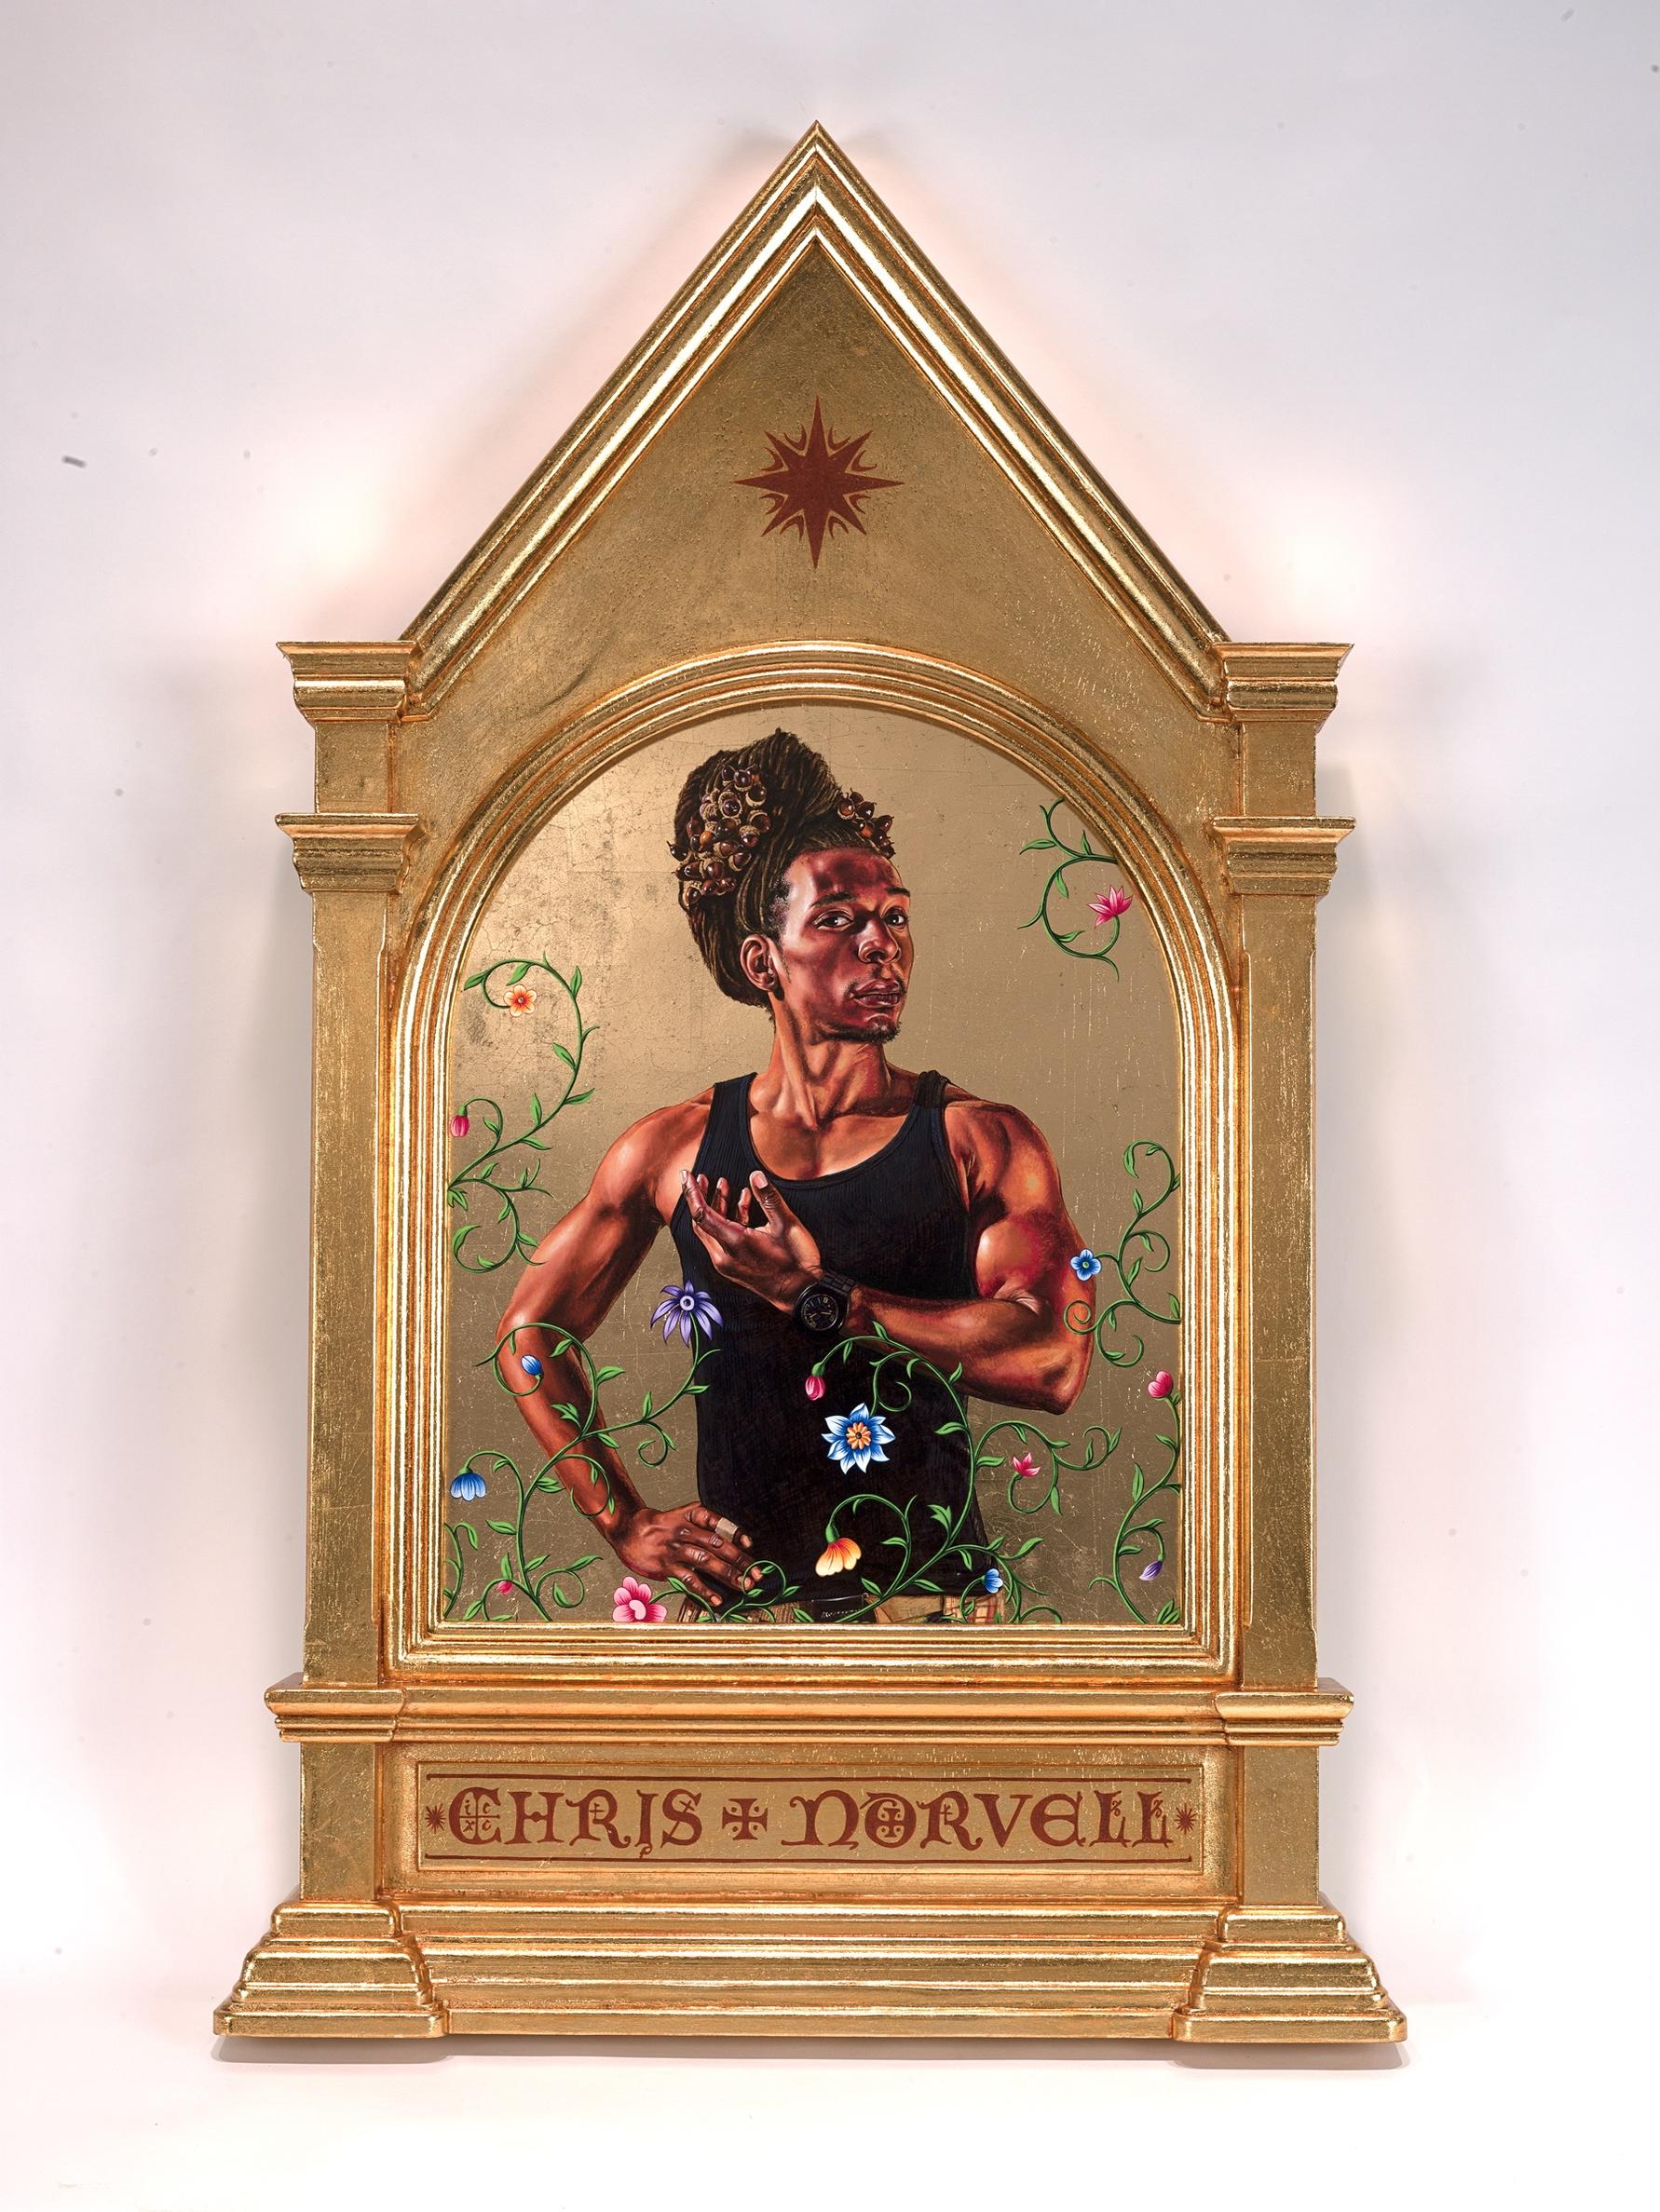 This oil painting on a wood panel is a portrait of a well toned young Black man from his head to his waist. It is approximately 3 ft tall and 2 feet wide. The painting is shaped into an upside down U and is surrounded by an elaborate, gilded, altar-like frame. The gold wooden frame has a steeply pointed upper “roof”-like element decorated with a painted, central, red, eight pointed compass rose. There are classical column-like elements on each side. The painting rests on a horizontal, multi-layered, gold pl